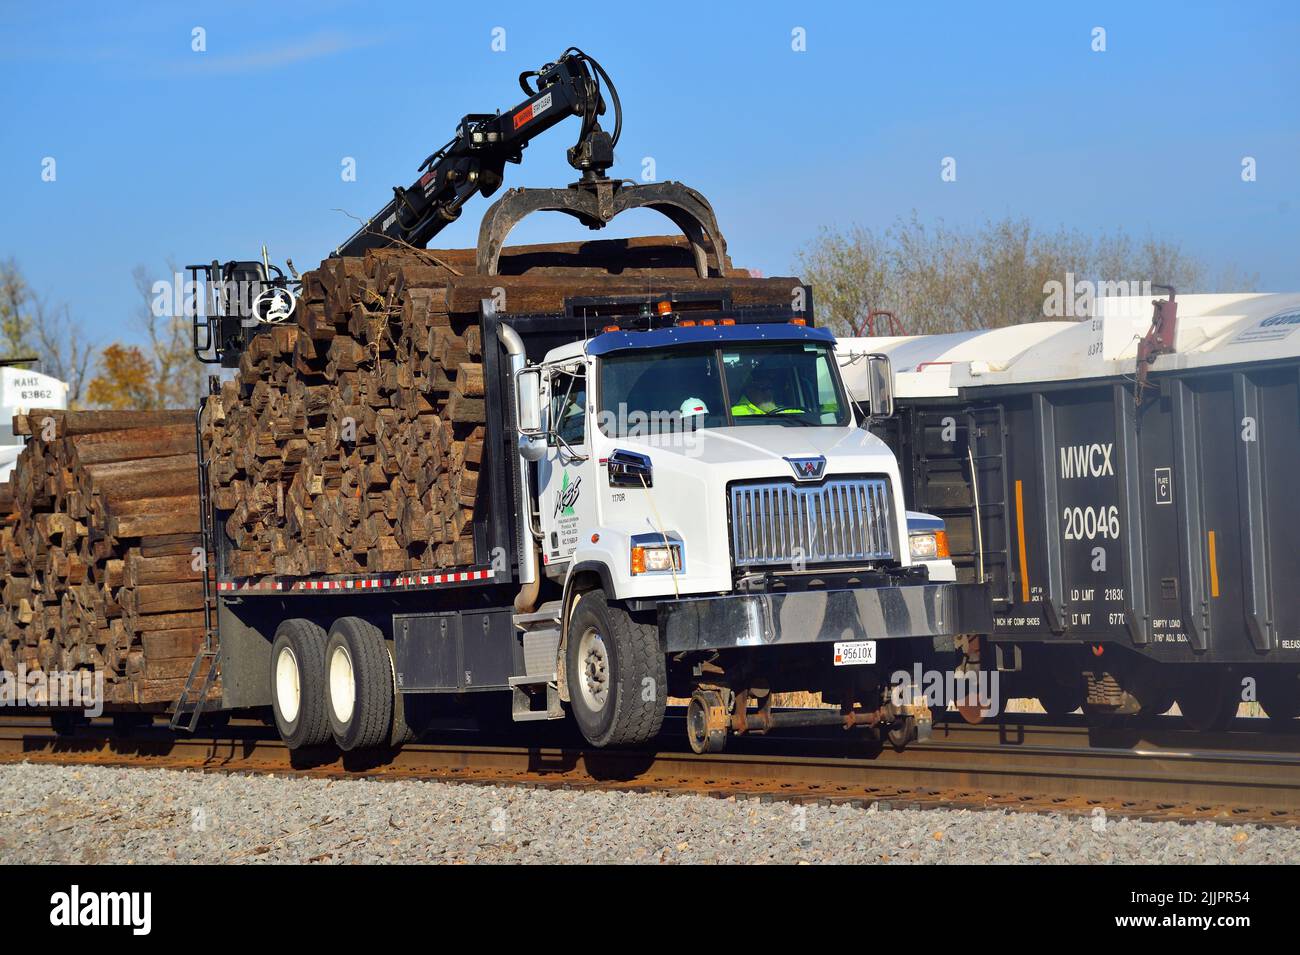 Hoffman Estates, Illinois, USA. A convertible road to rail truck carries and provides pulling power as part of tie replacement work along the route. Stock Photo